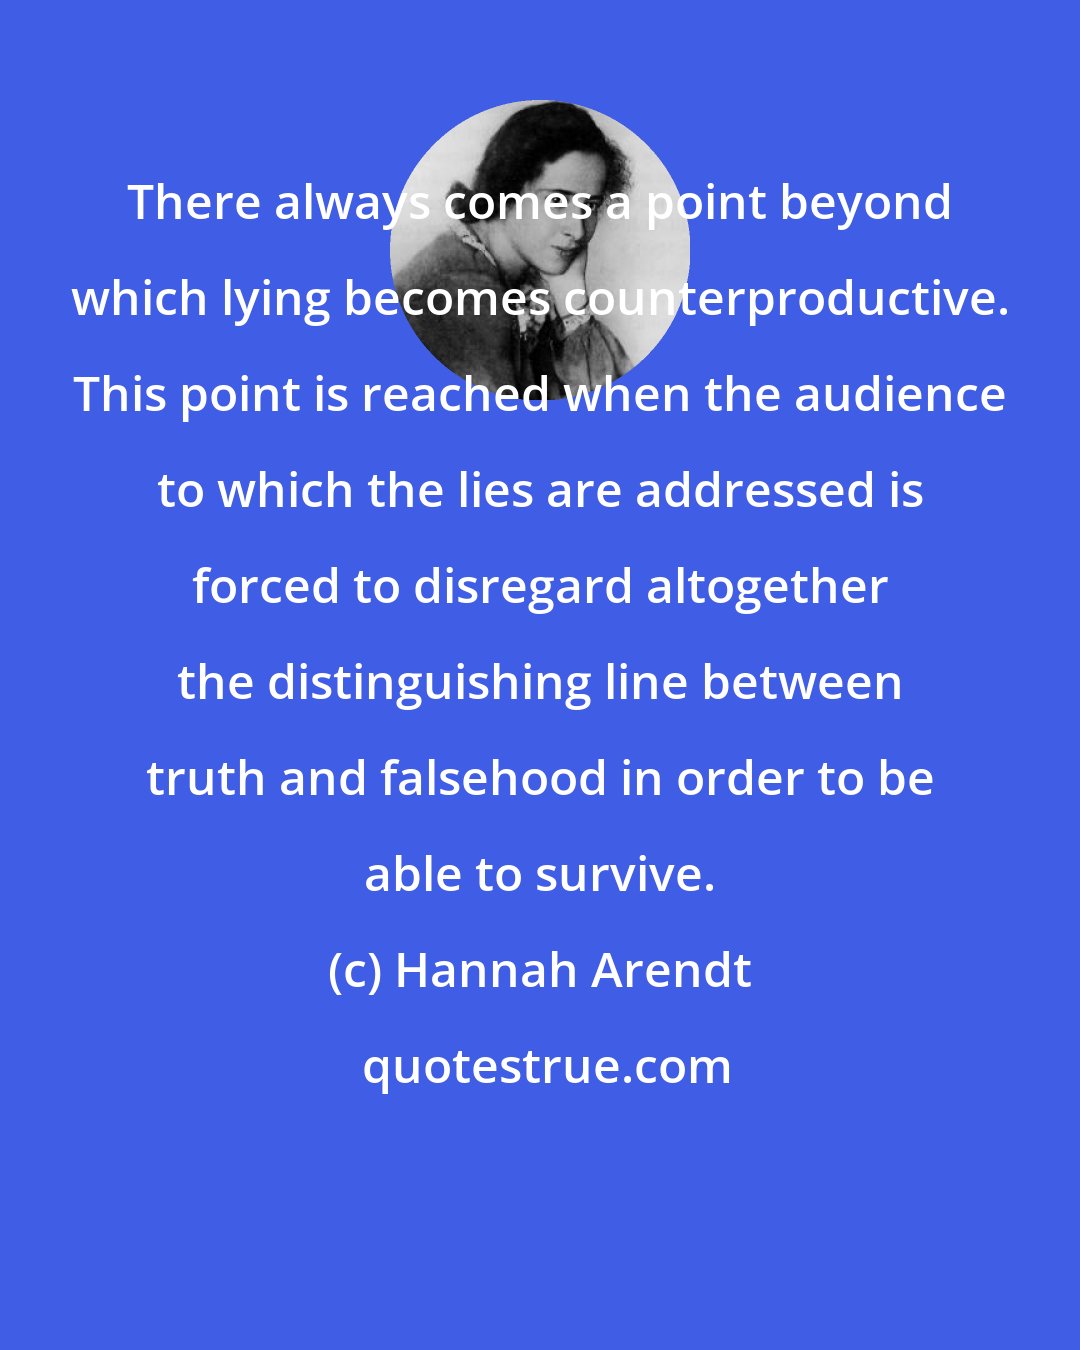 Hannah Arendt: There always comes a point beyond which lying becomes counterproductive. This point is reached when the audience to which the lies are addressed is forced to disregard altogether the distinguishing line between truth and falsehood in order to be able to survive.